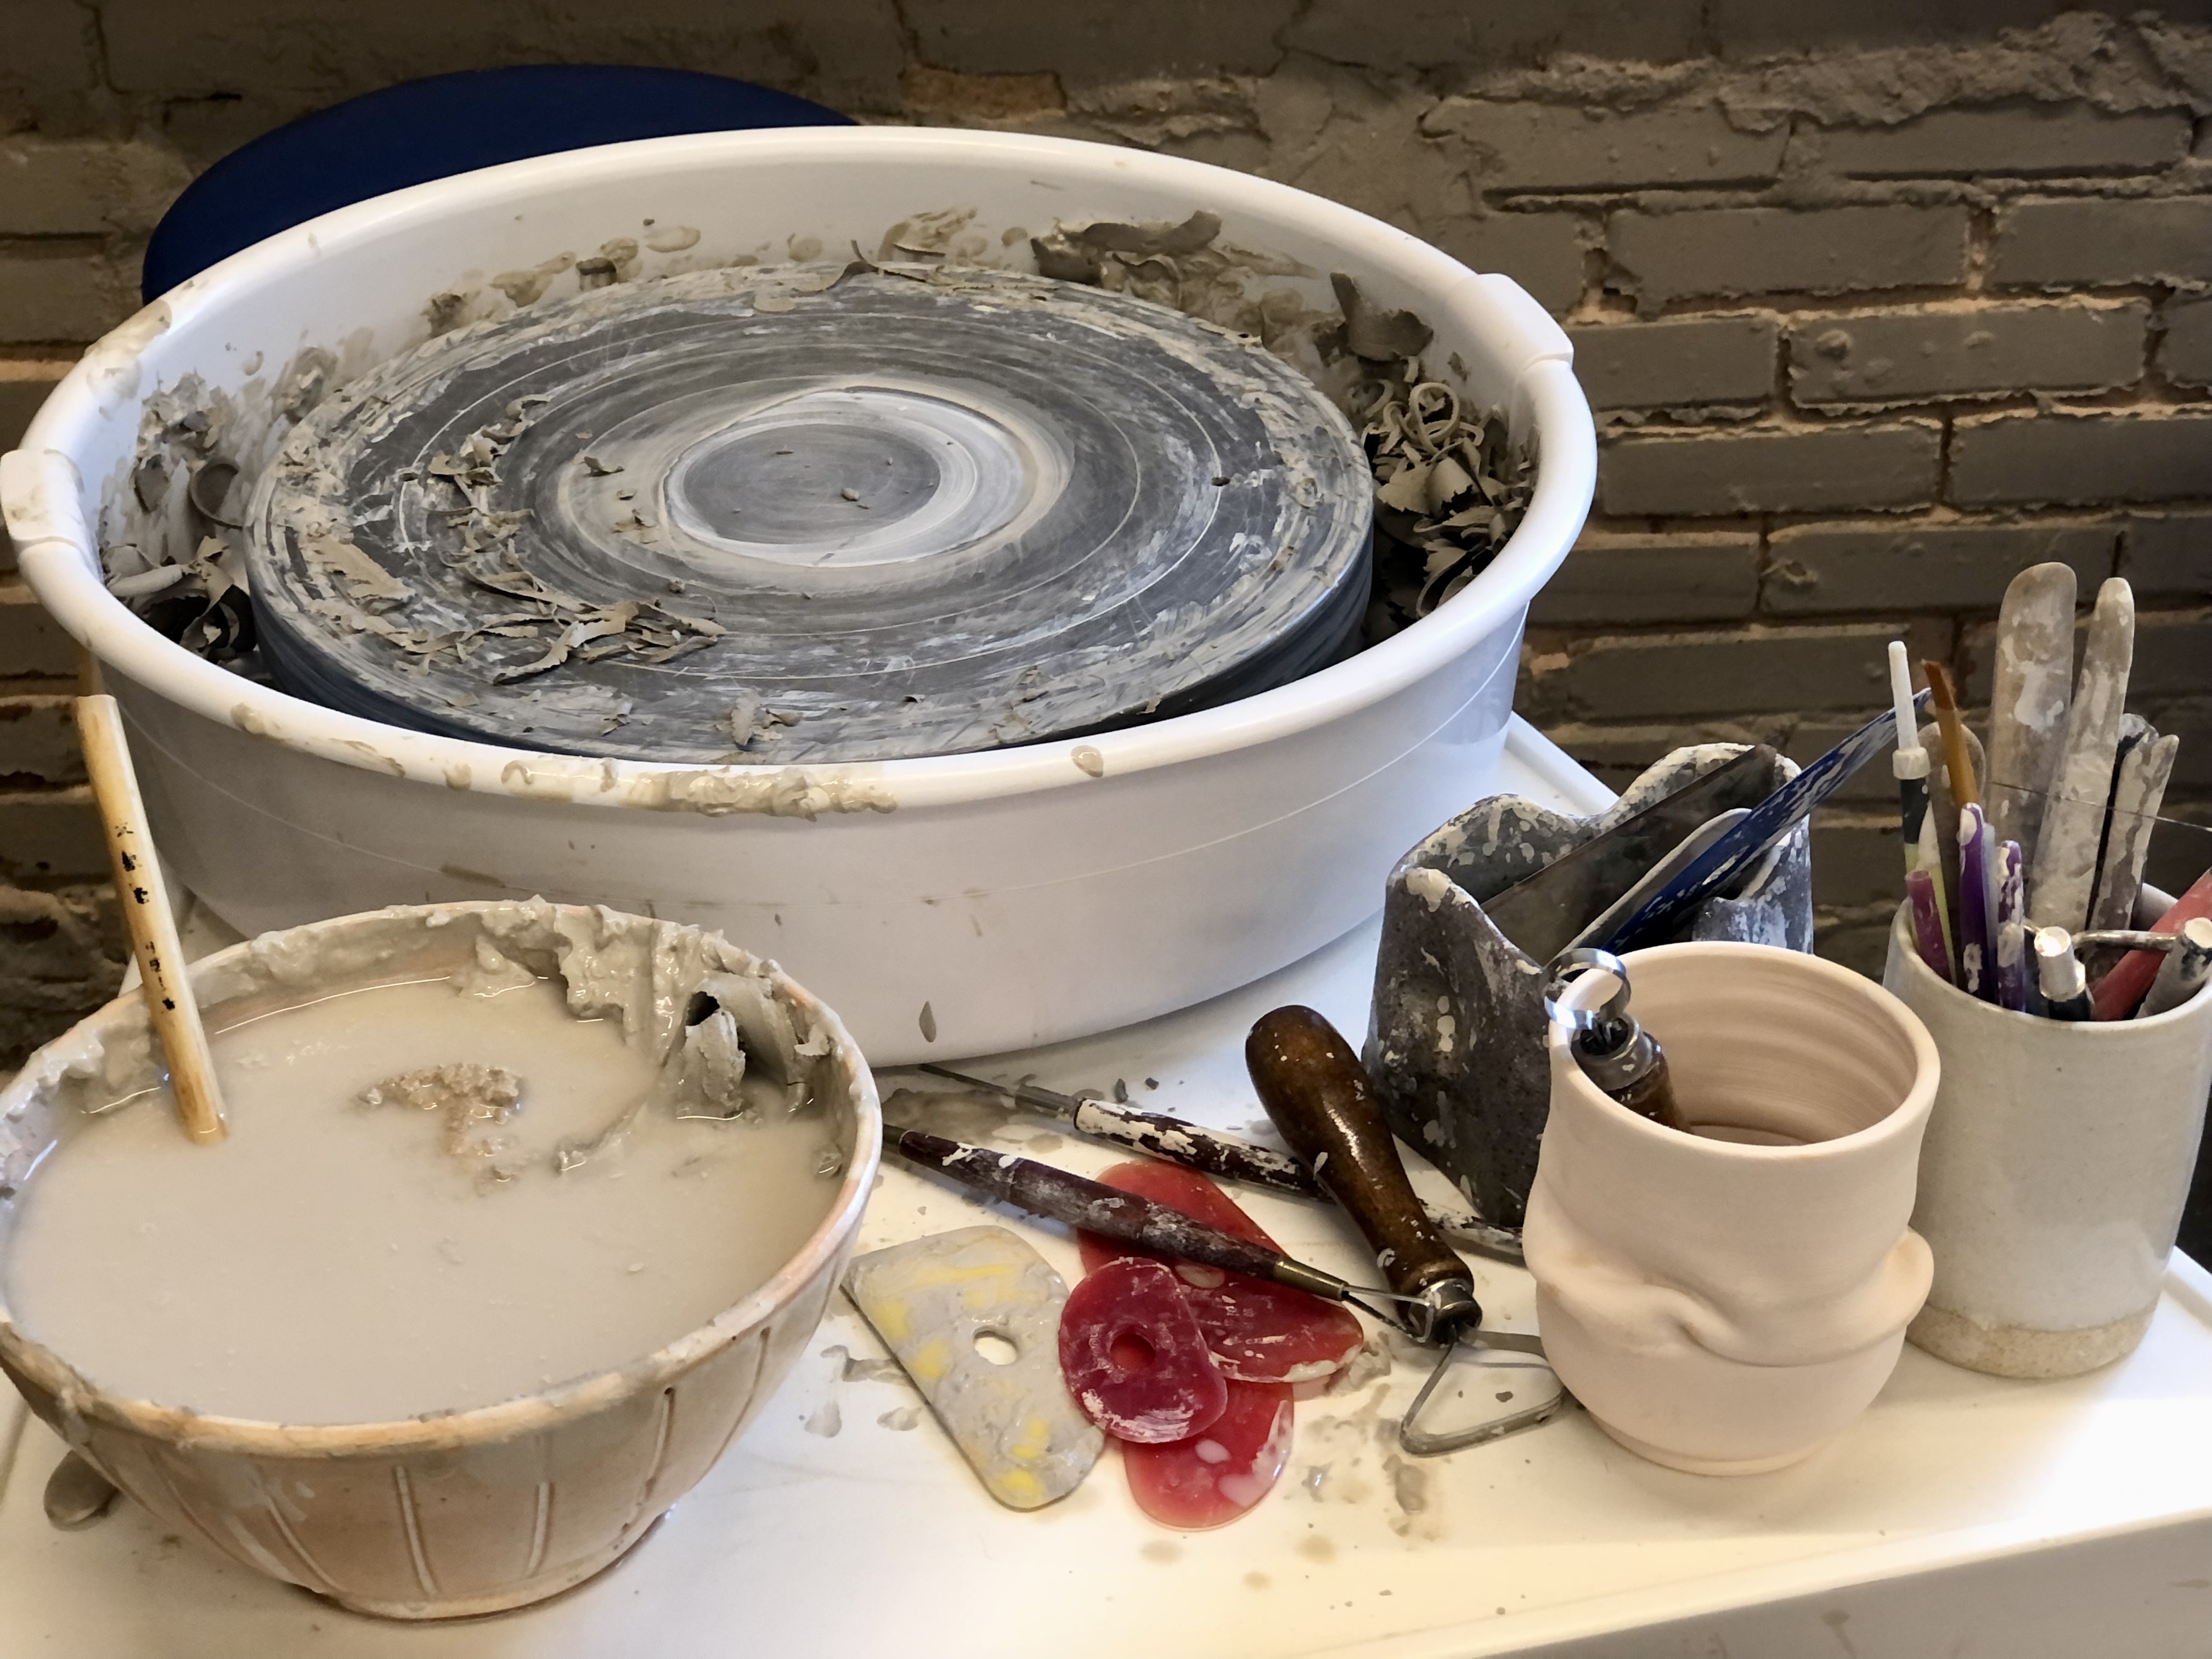 A dirty throwing wheel is covered in pieces of clay. A bowl with murky water sits in front, along with two clay vessels, both beige, one holding used brushes and tools.